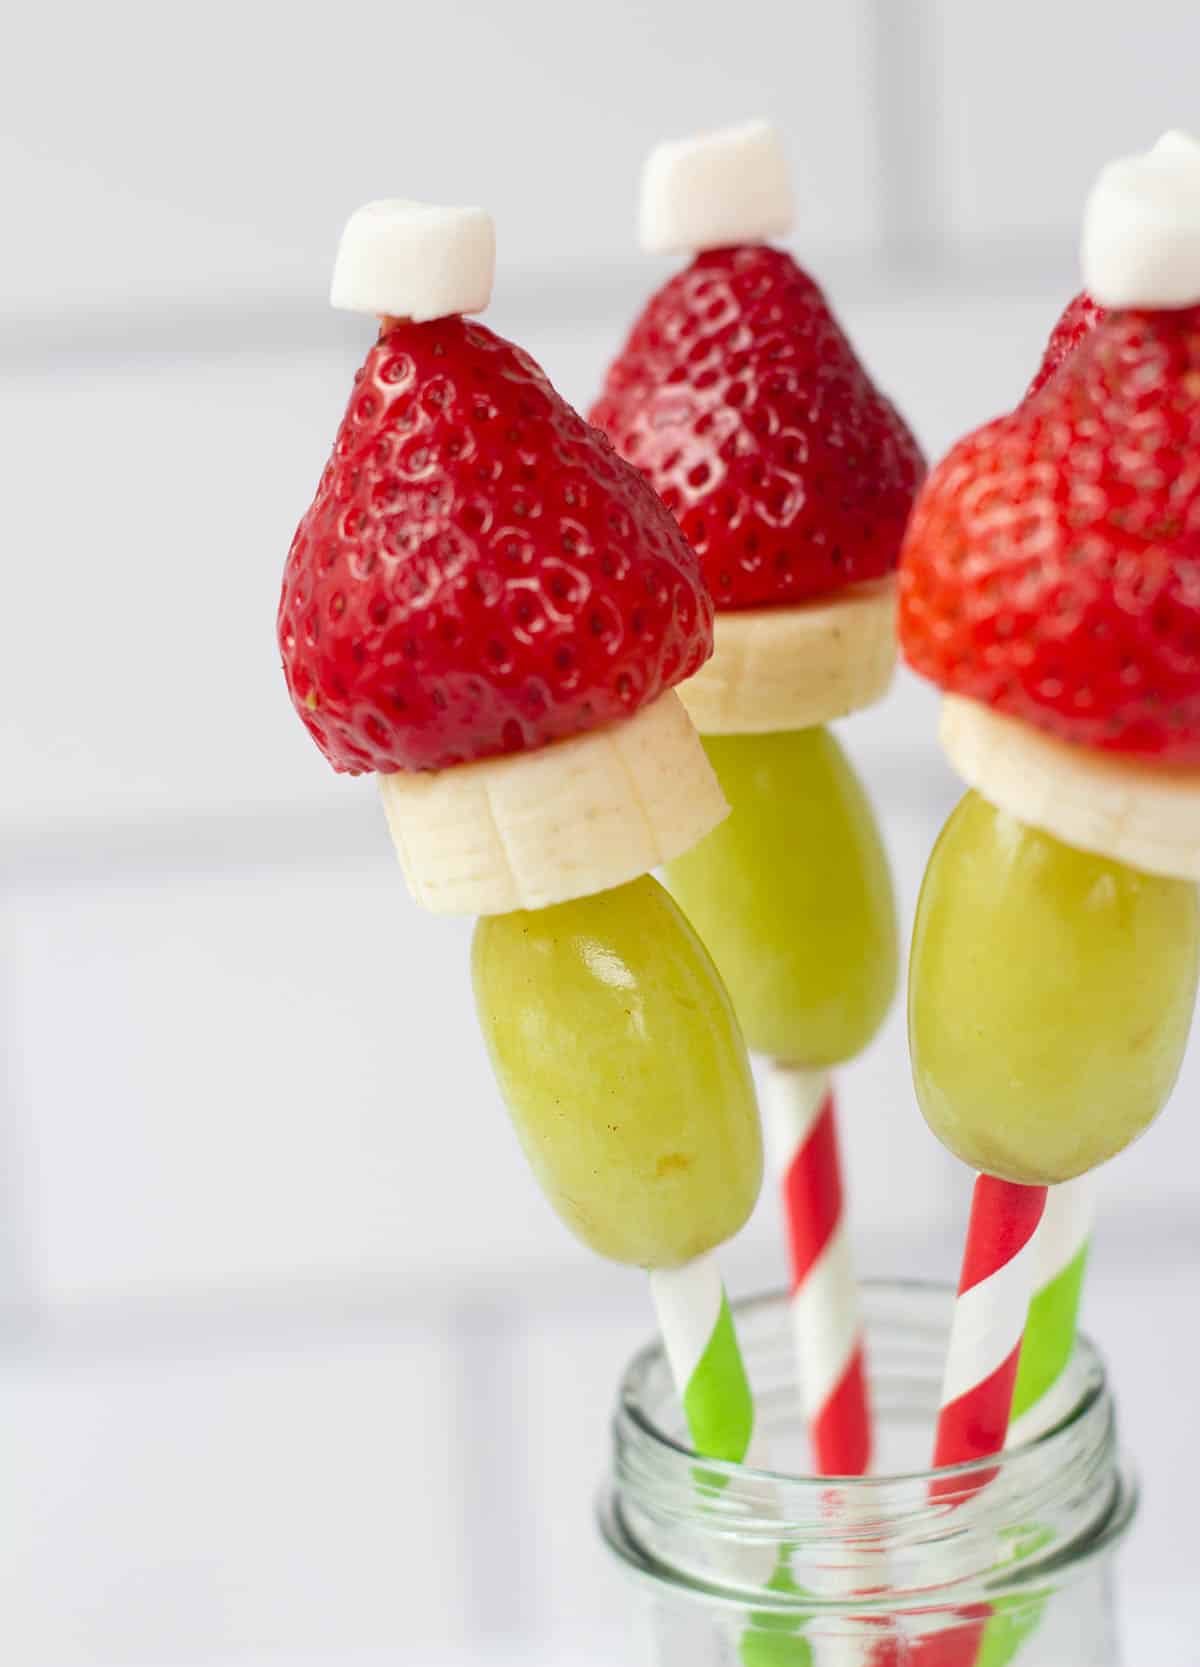 holiday fruit skewers made to look like the grinch with green grapes, banana, strawberry and a marshmallow puff